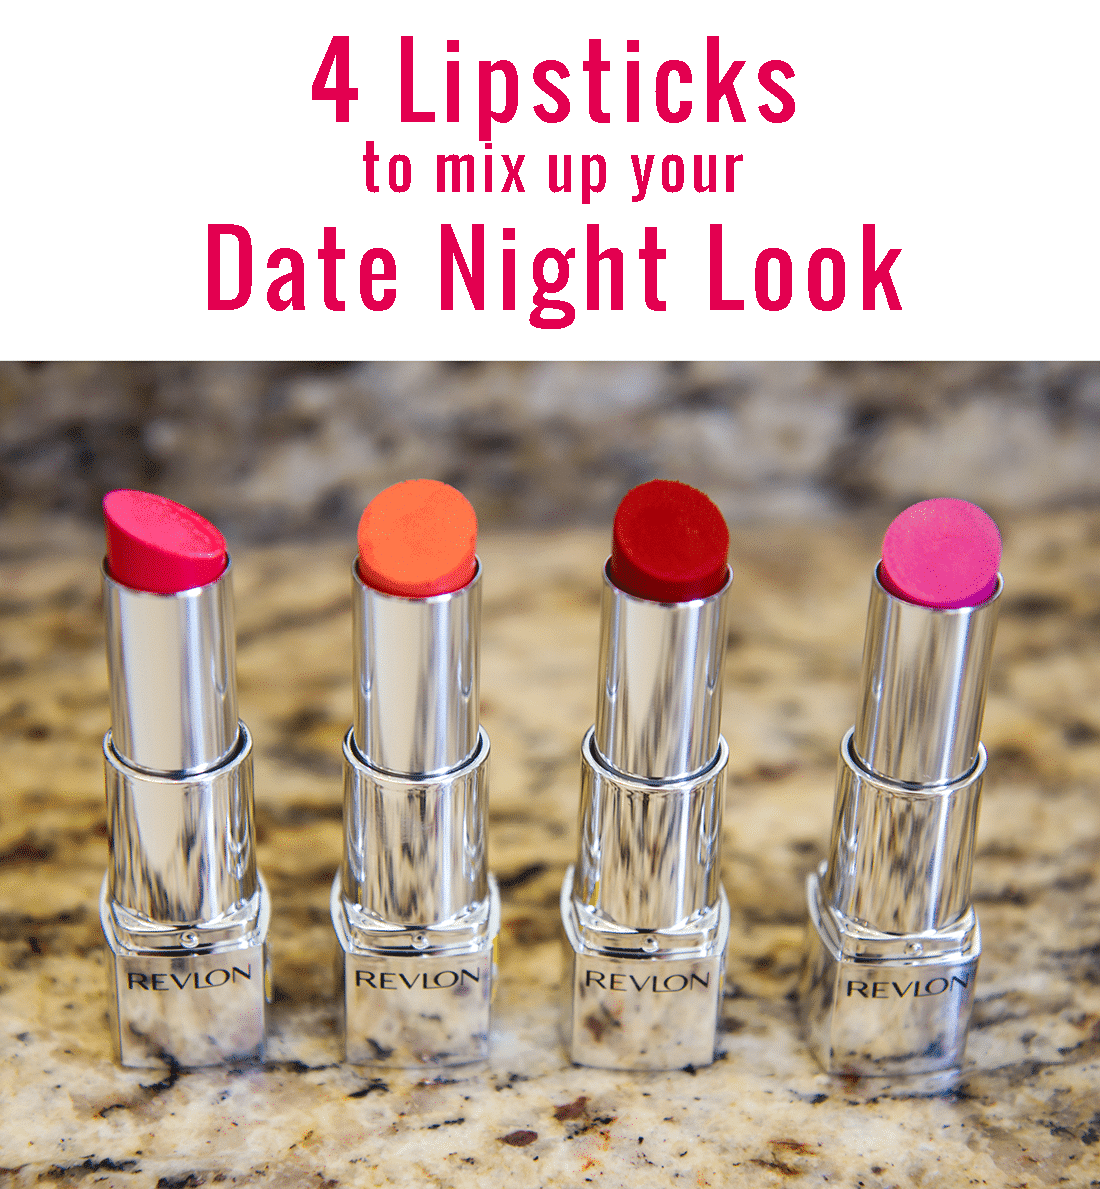 4 Lipsticks to Mix Up Your Date Night Look